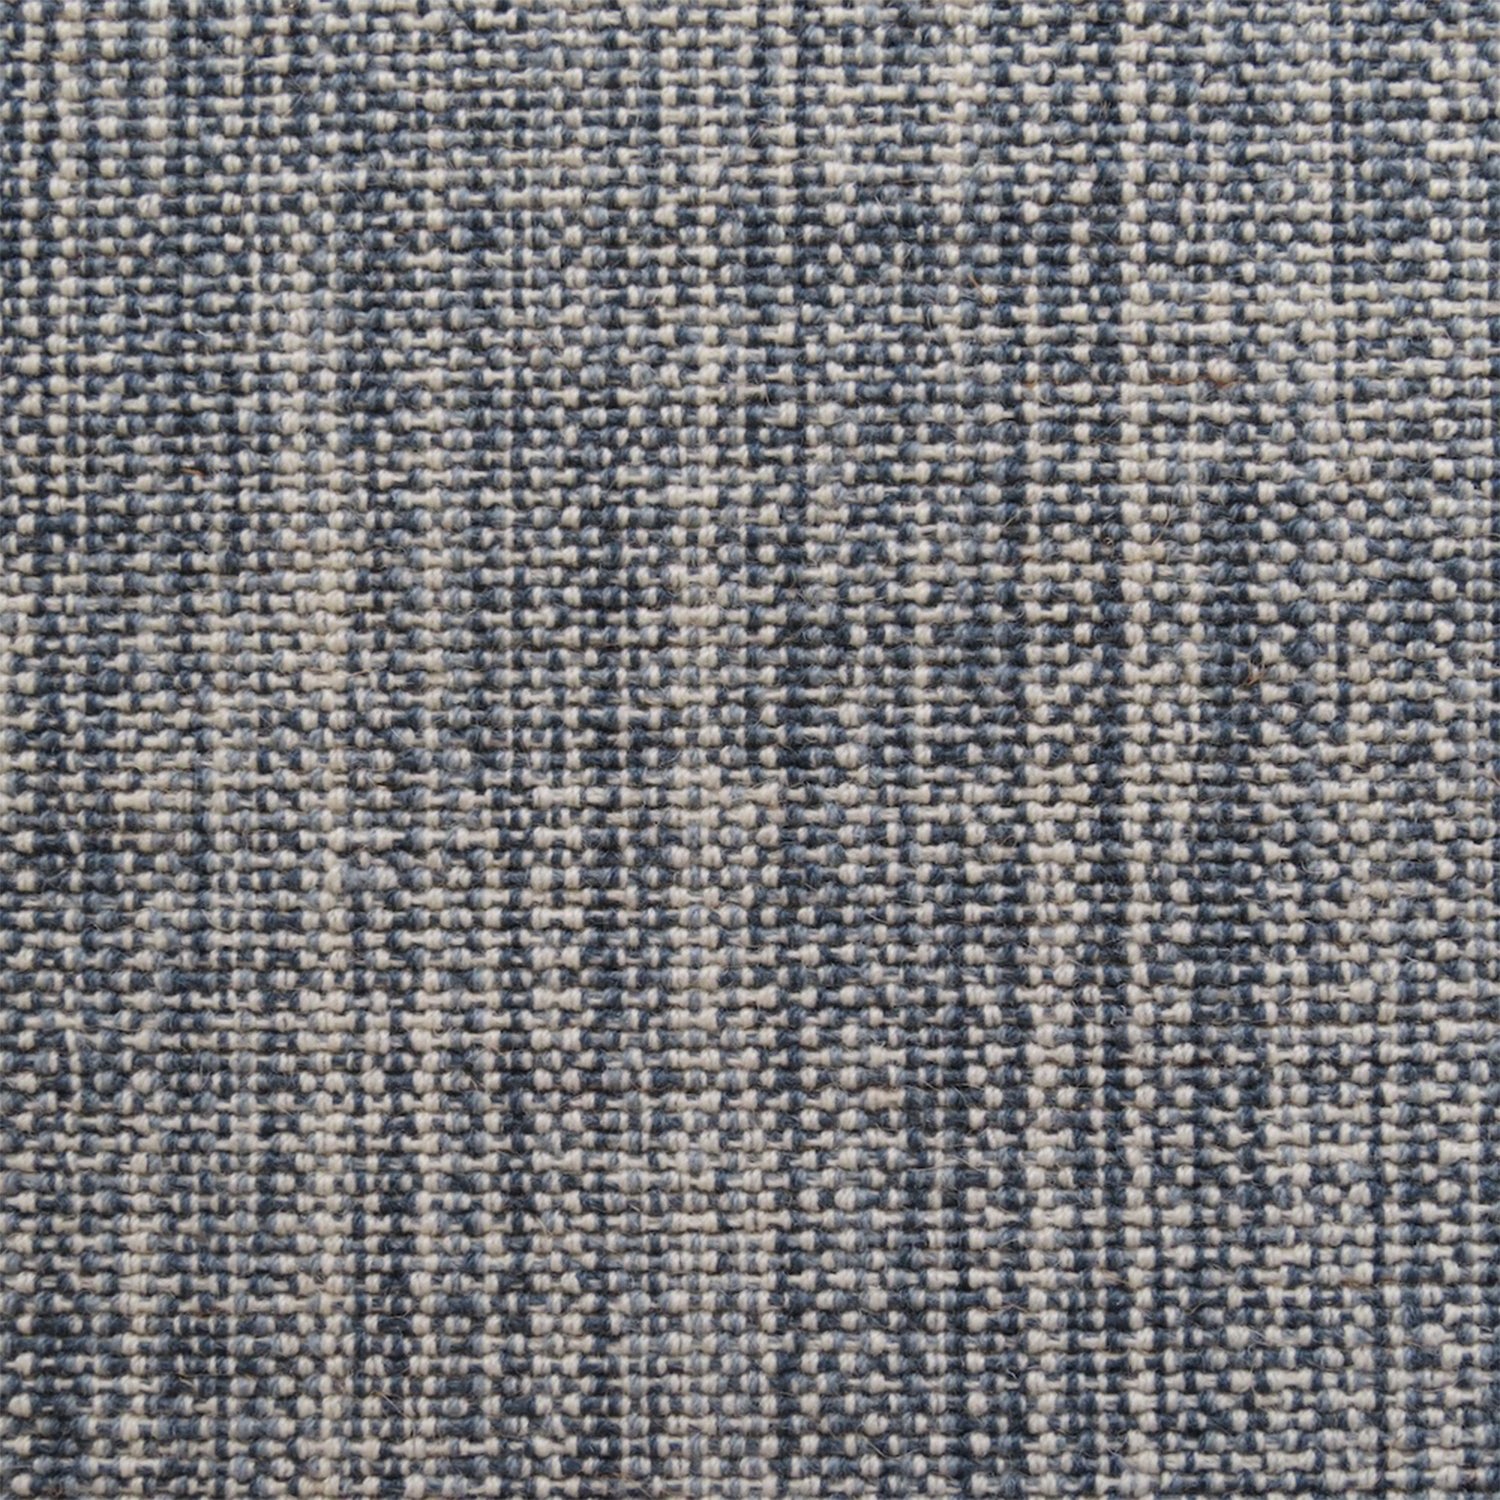 Linen broadloom carpet swatch in a woven mottled check pattern in cream and navy.